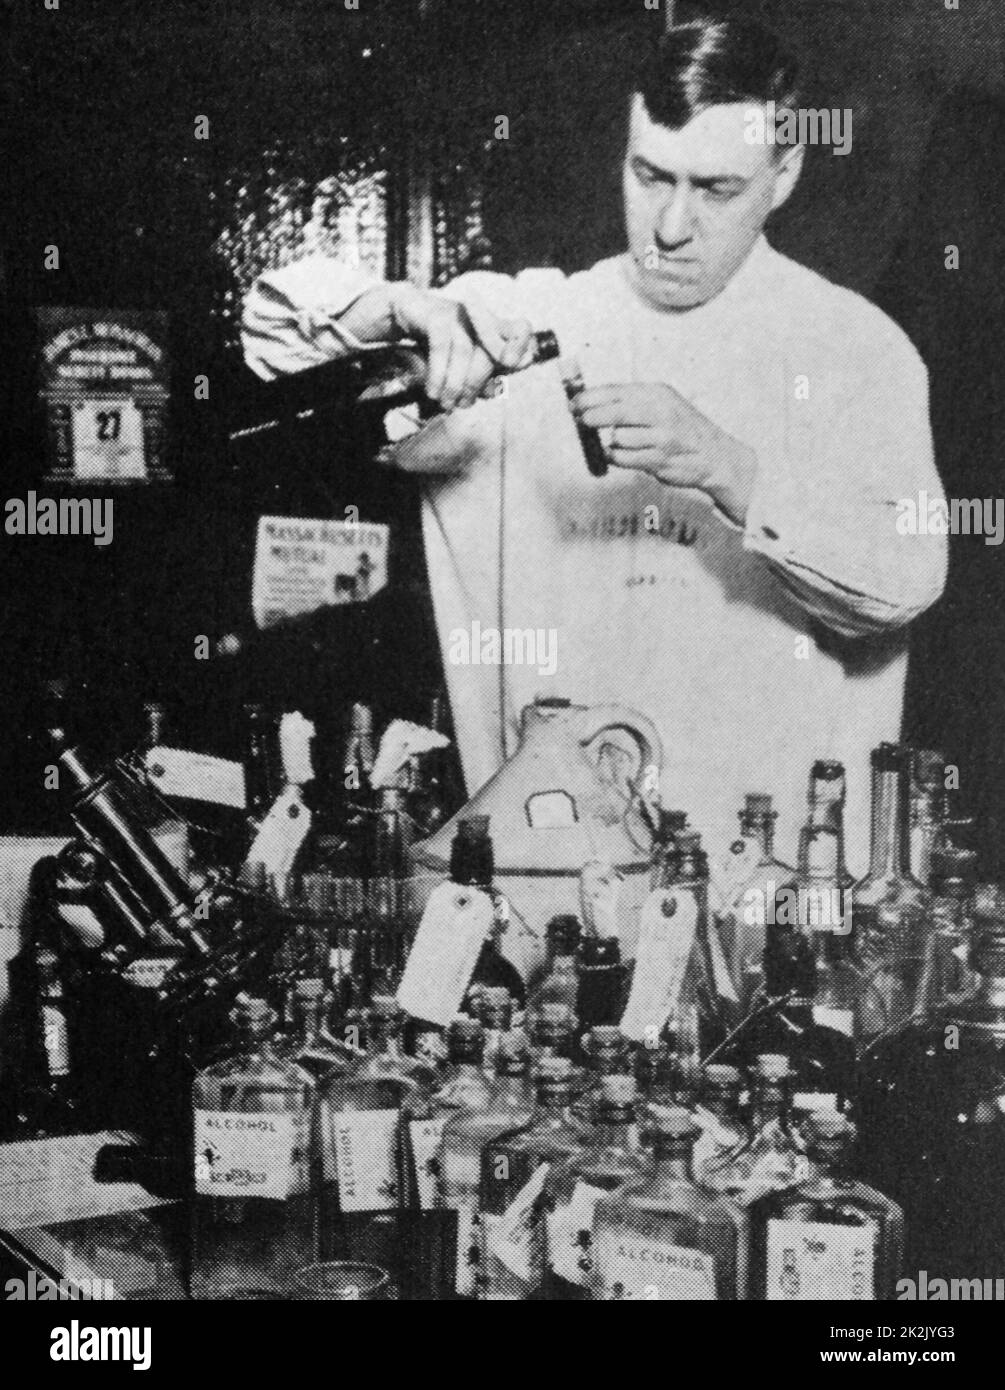 Mr William D McNally, coroner's chemist in chicago, testing samples of liquor seized by the police. Wood alcohol was found in many of these samples. Stock Photo